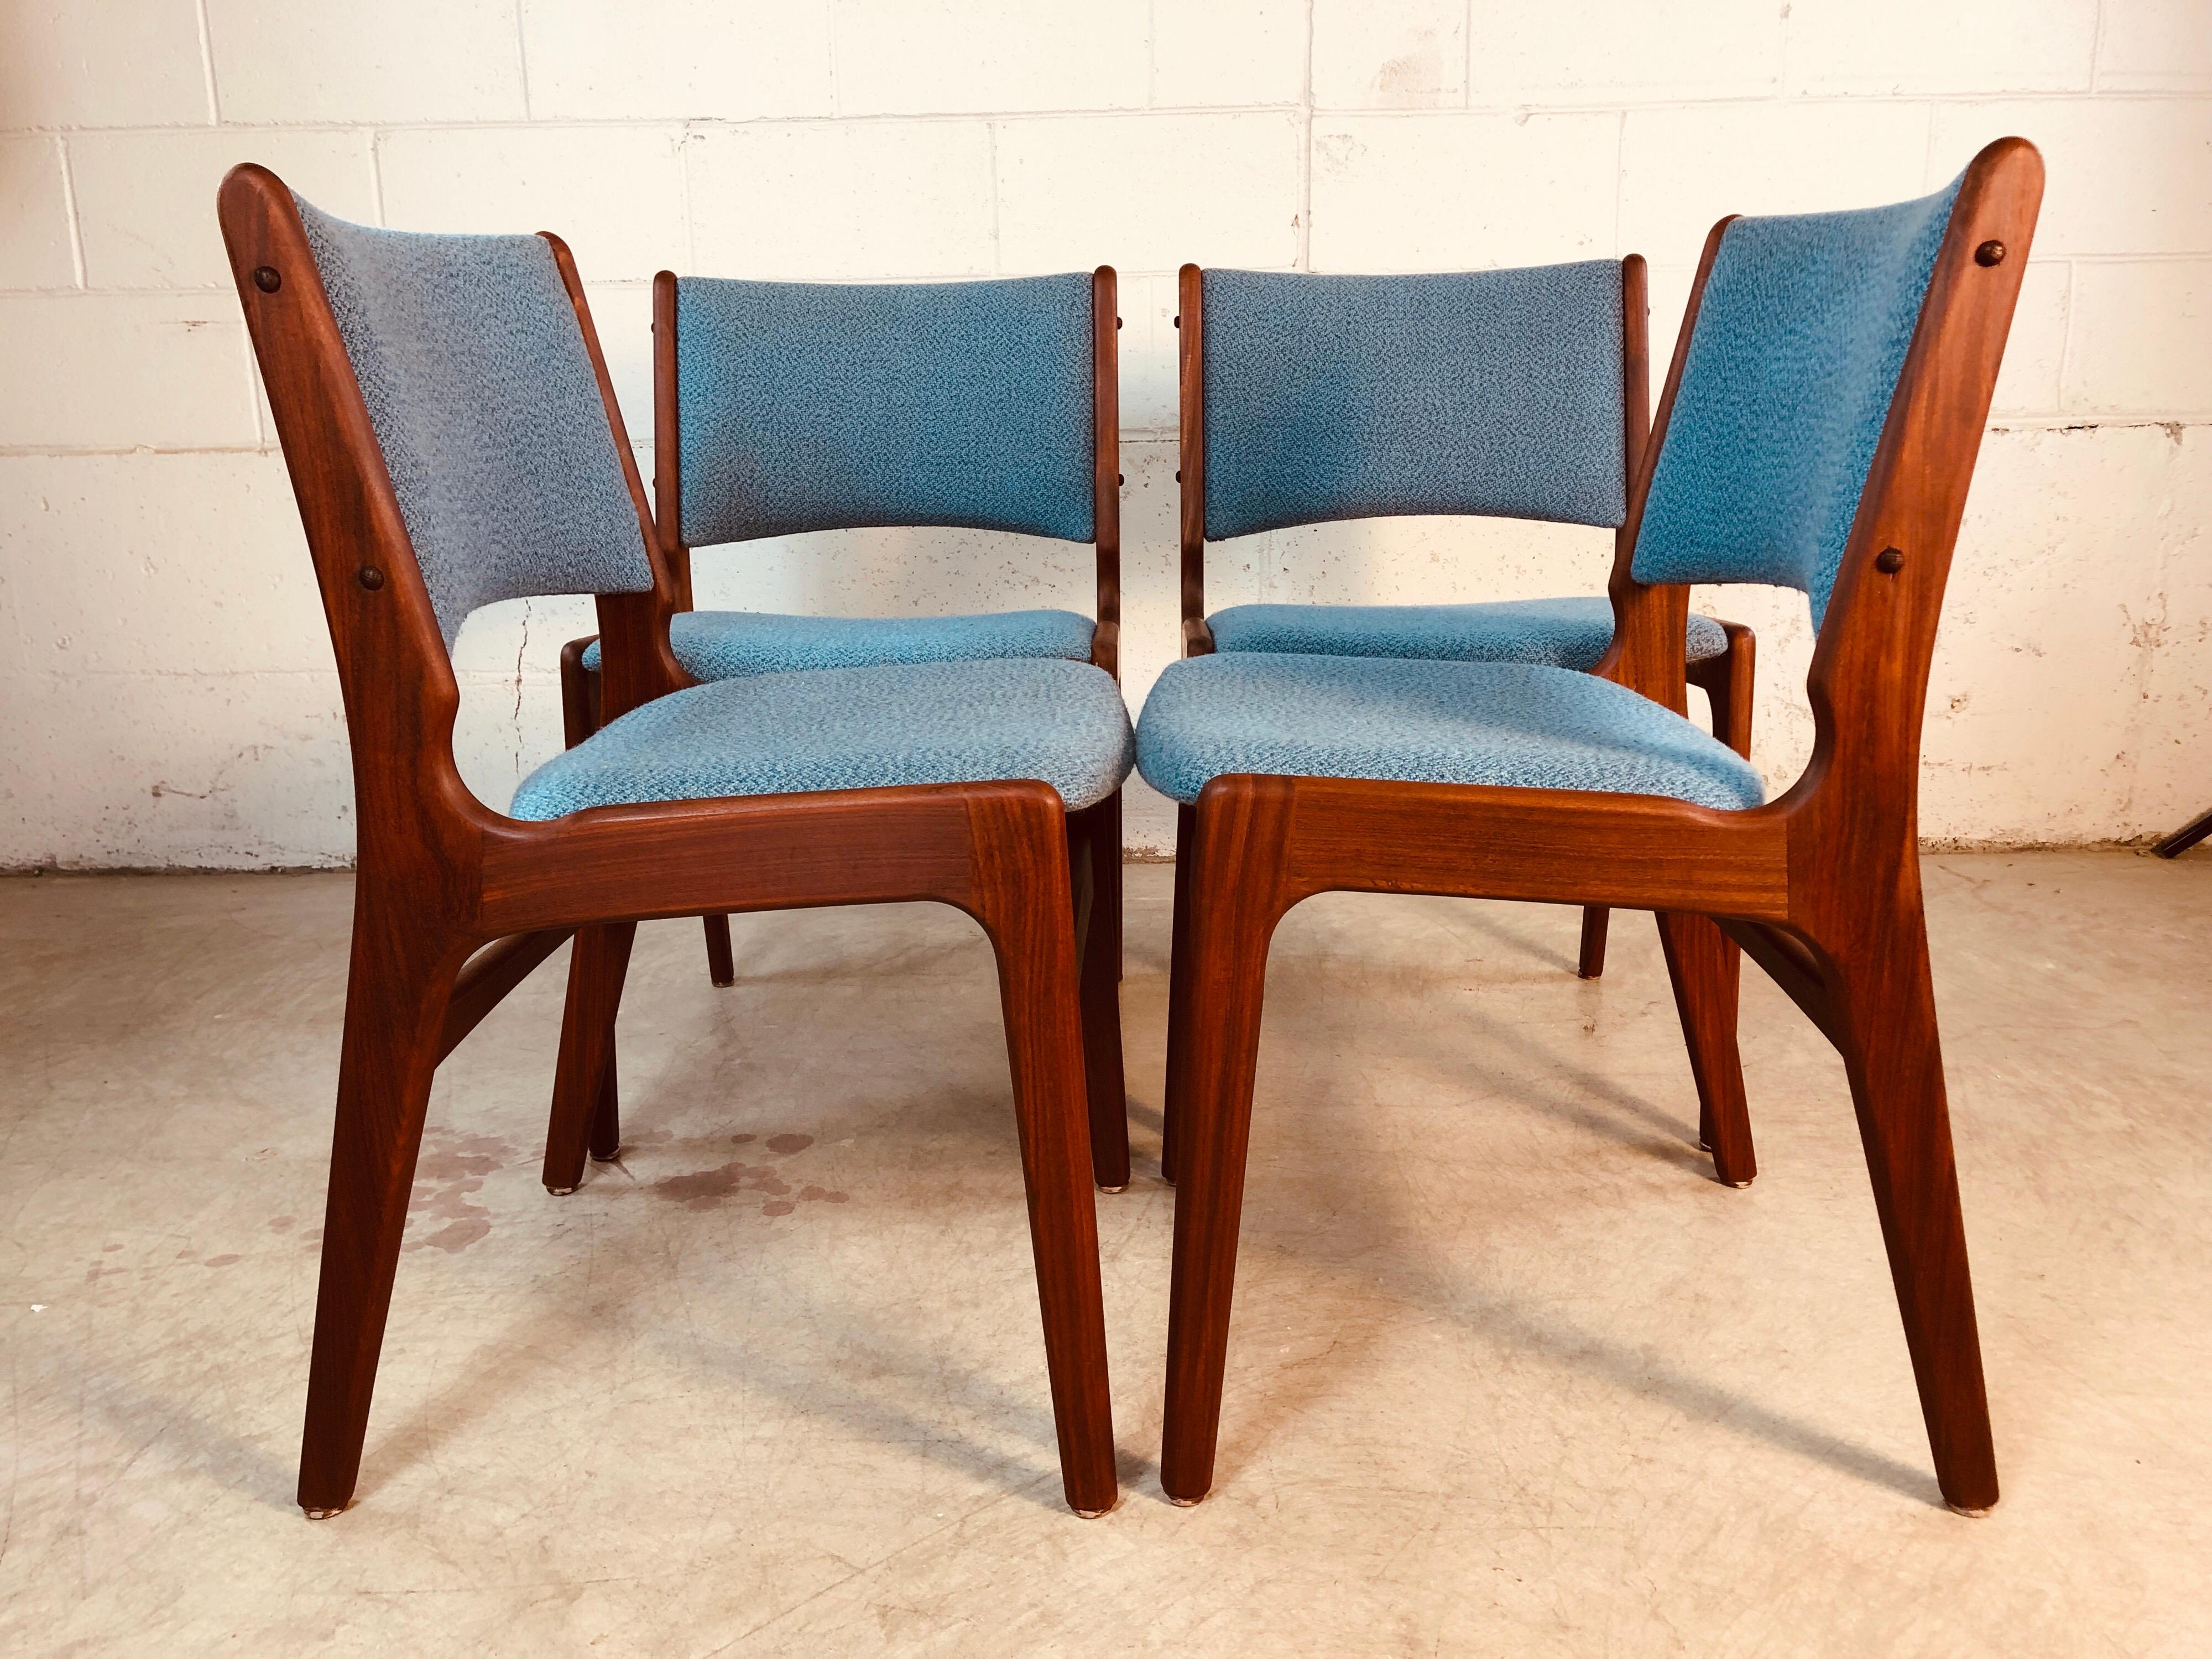 1960s Danish Teak Dining Room Chairs, Set of 4 In Good Condition For Sale In Amherst, NH